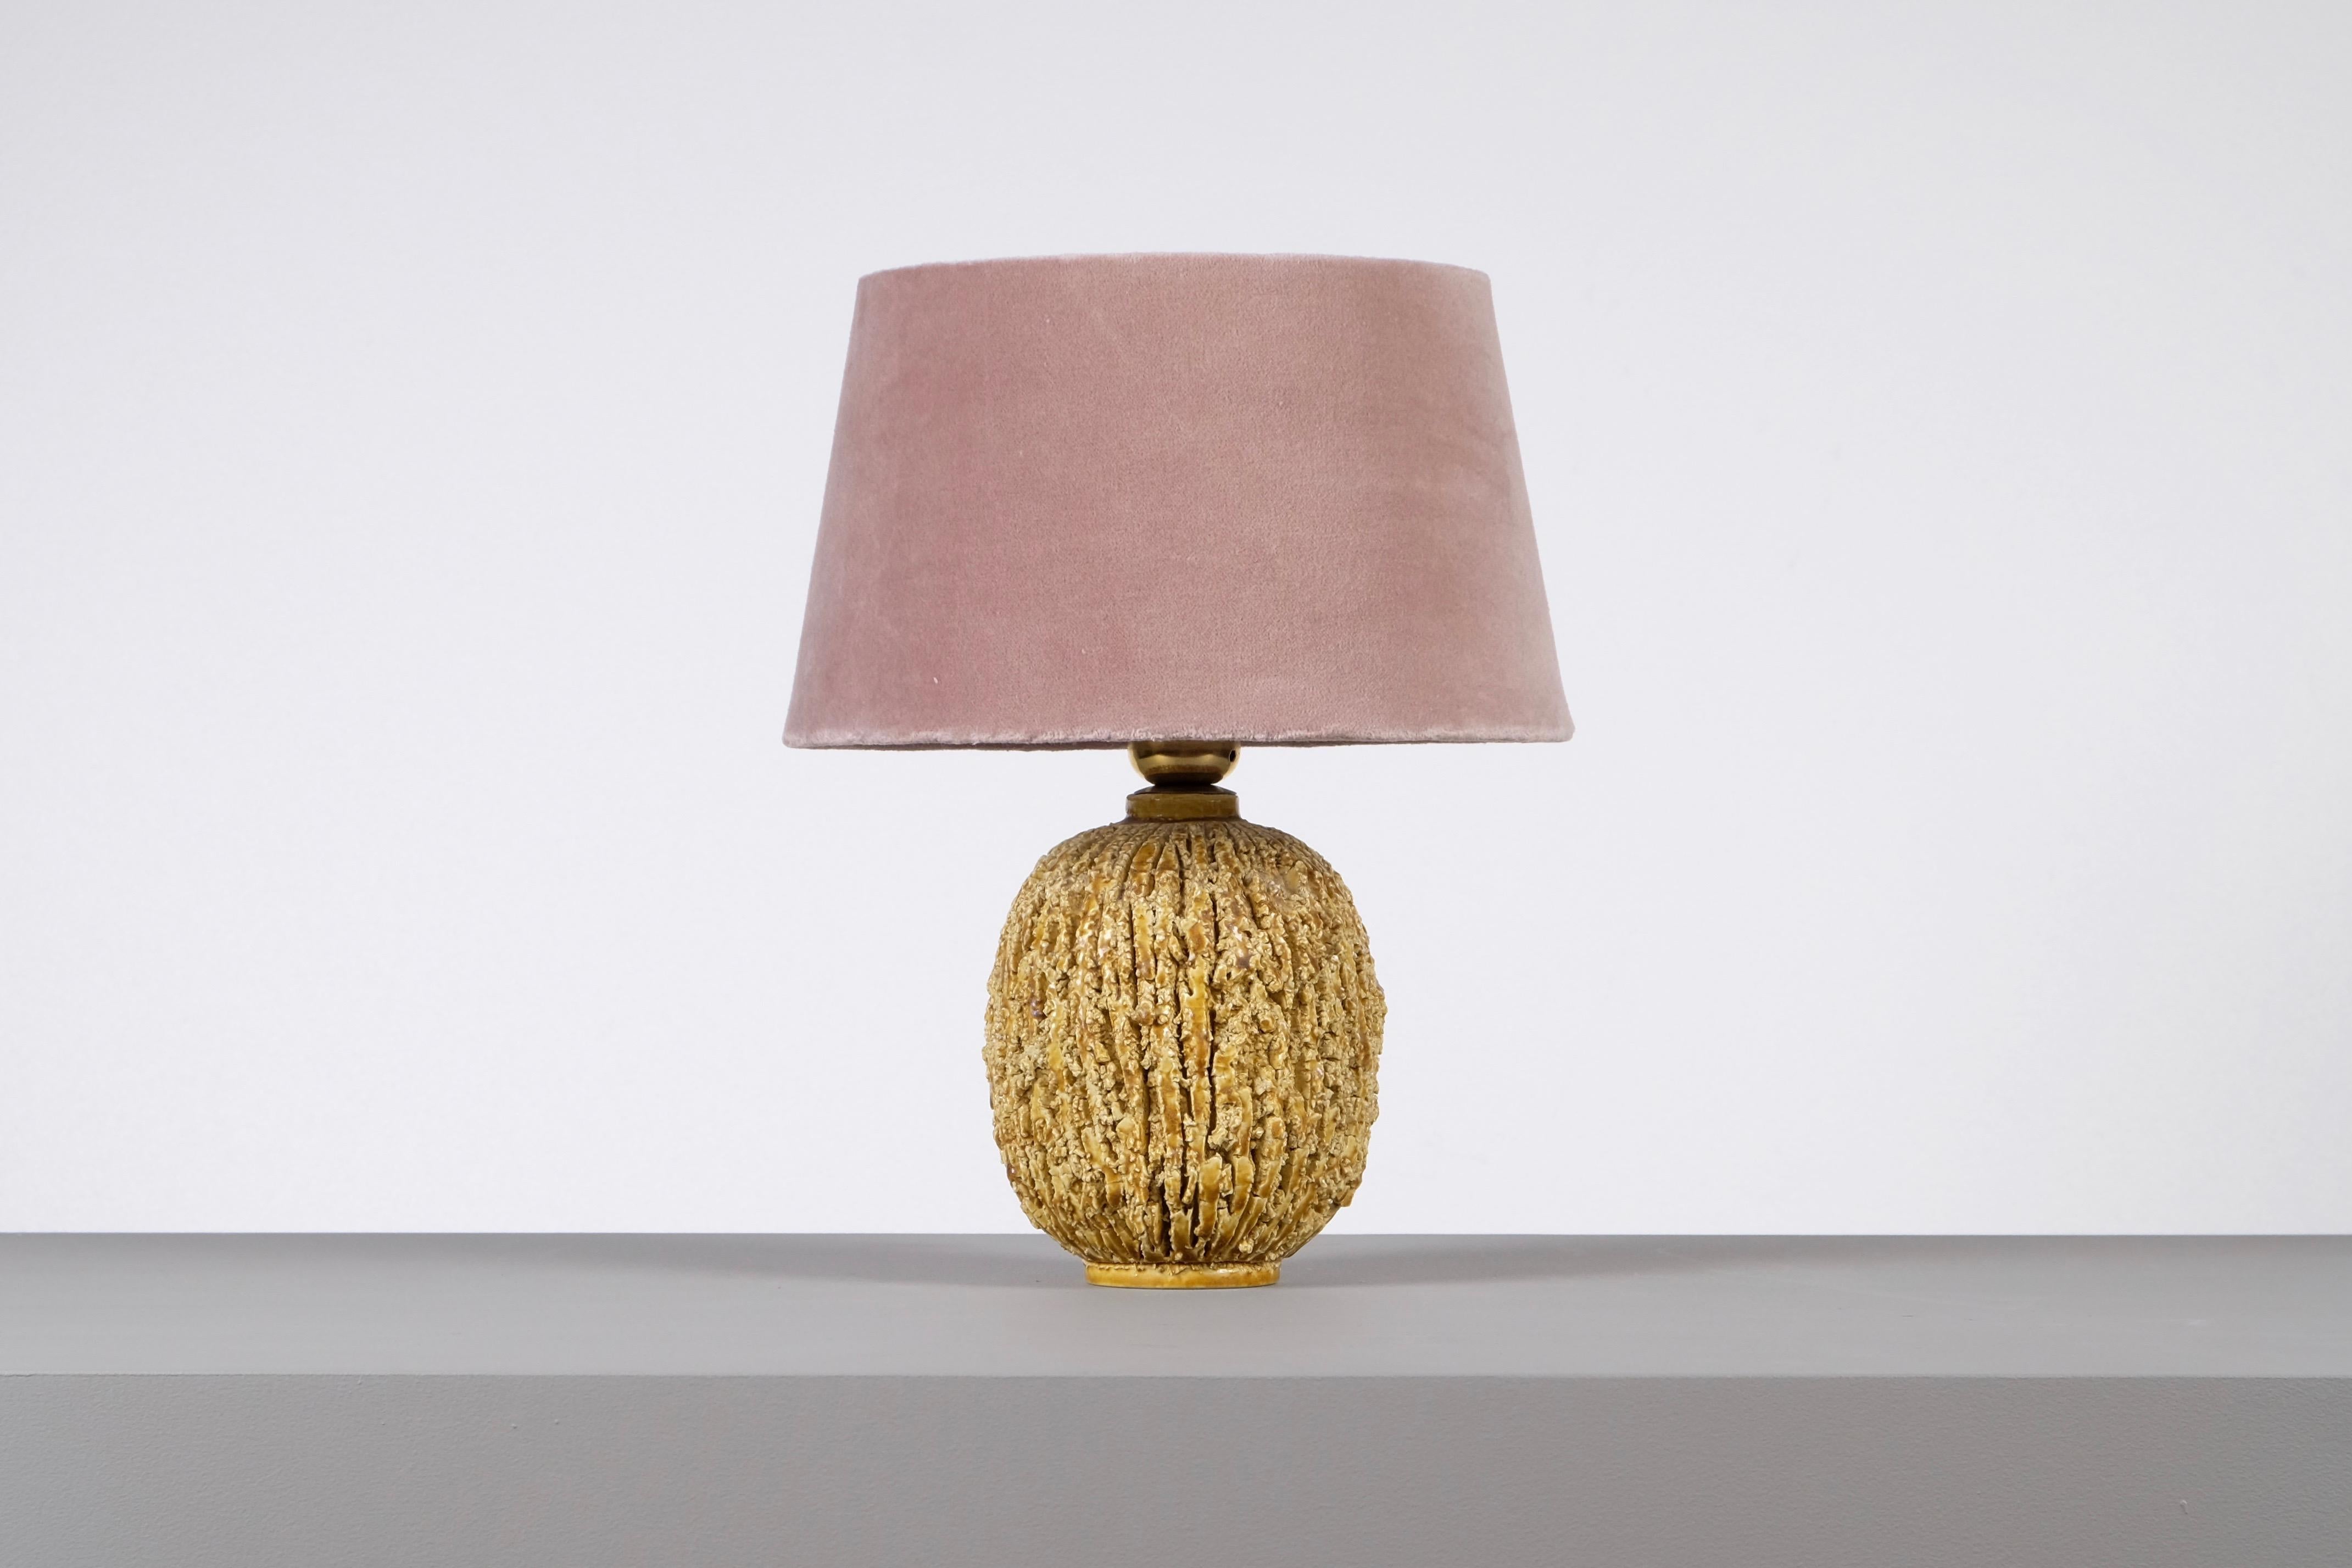 Ceramic lamp in bulbous shape by Gunnar Nylund, composed of chamotte clay and glazed with a gold colored luster glaze. Produced by Rörstrand.
Stamped. Measures: Height including shade 33 cm. New wiring.